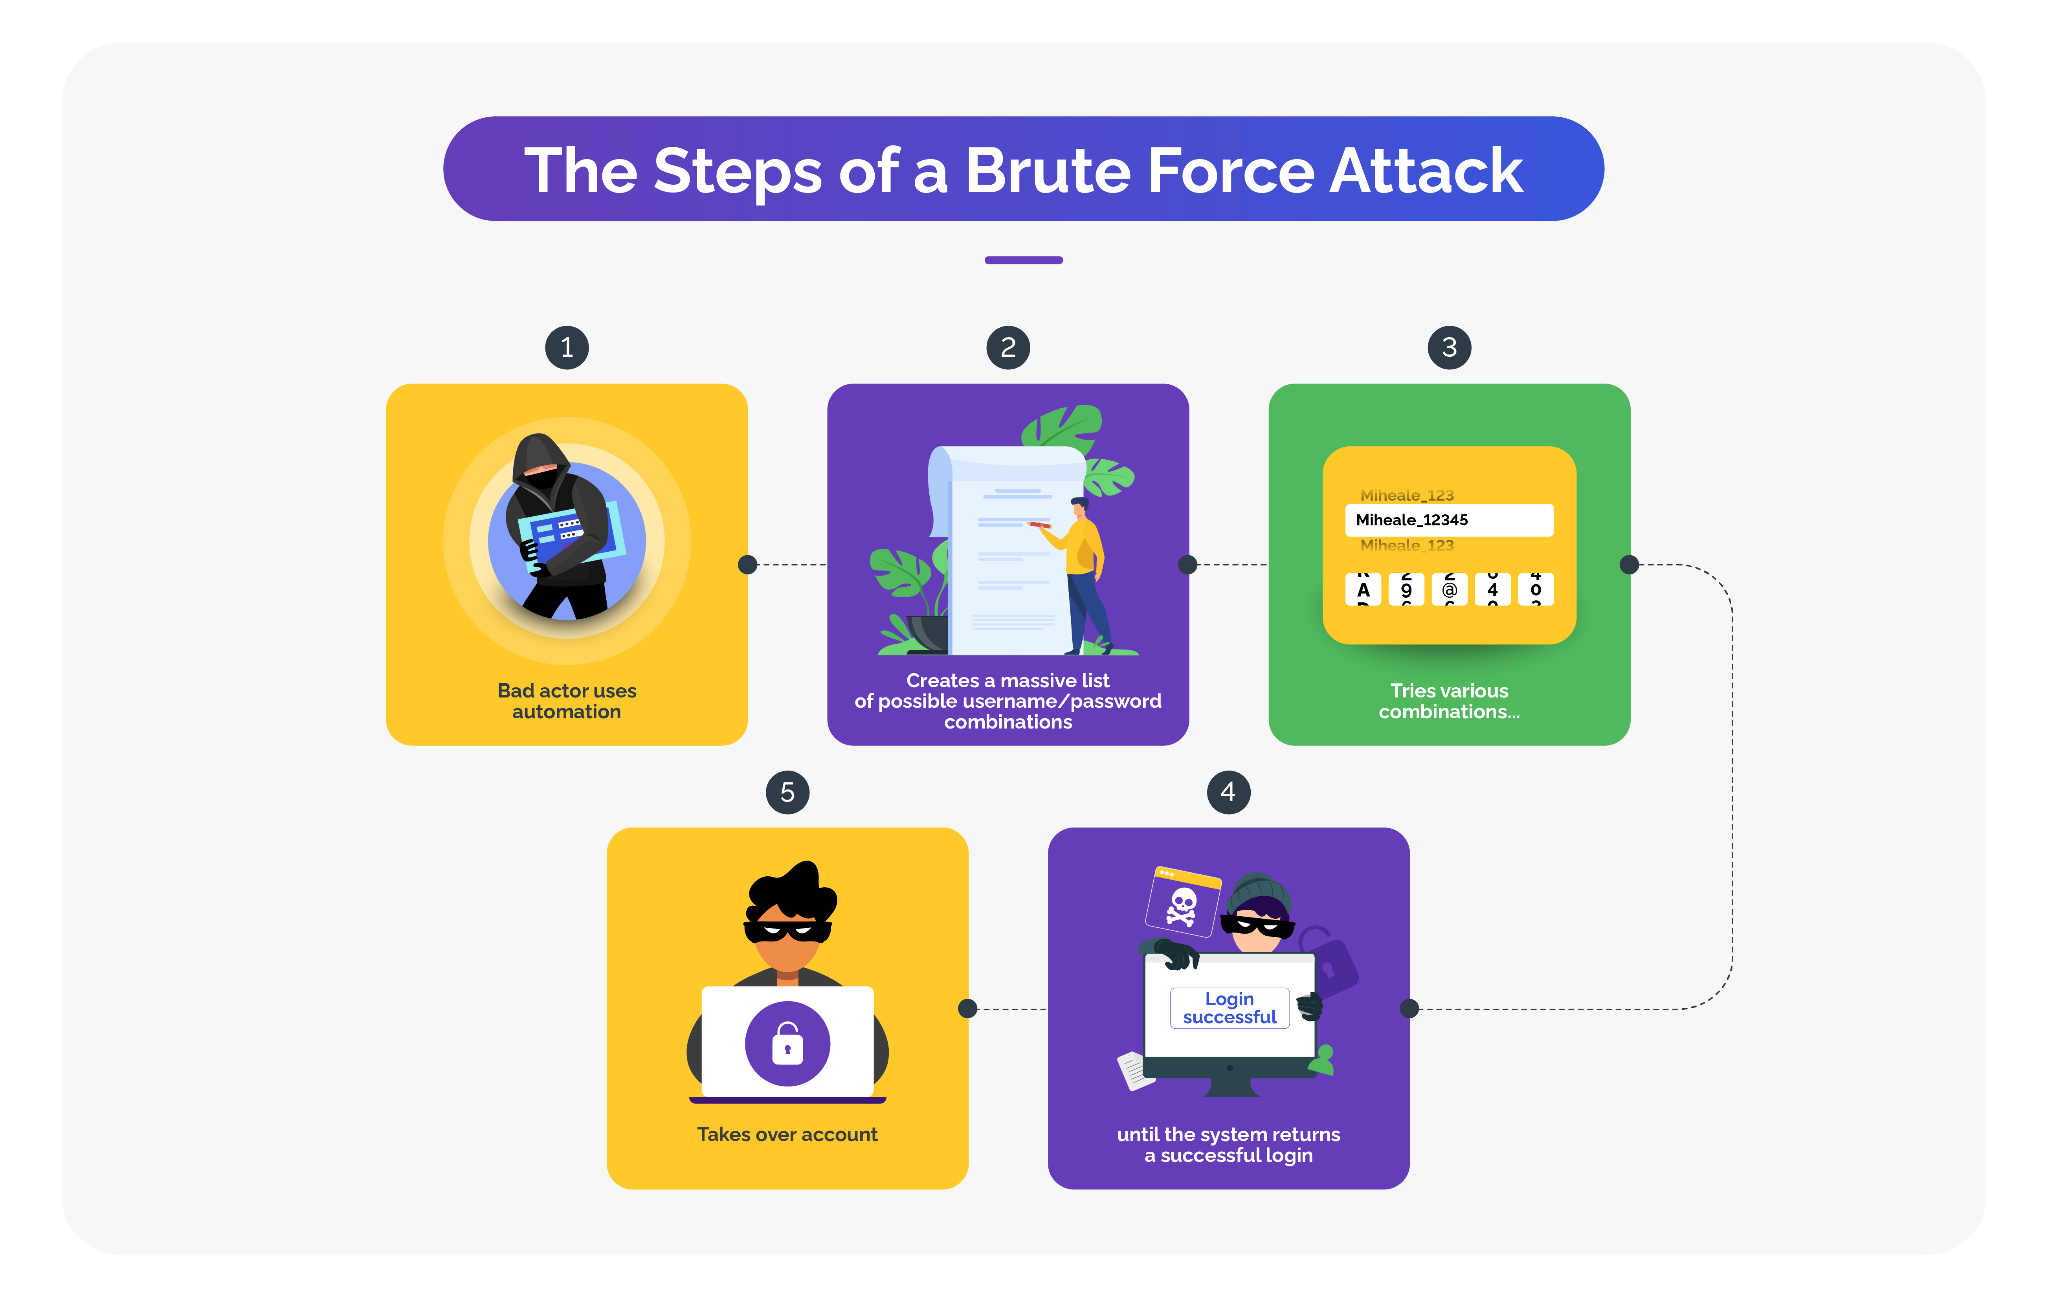 The steps of a brute force attack